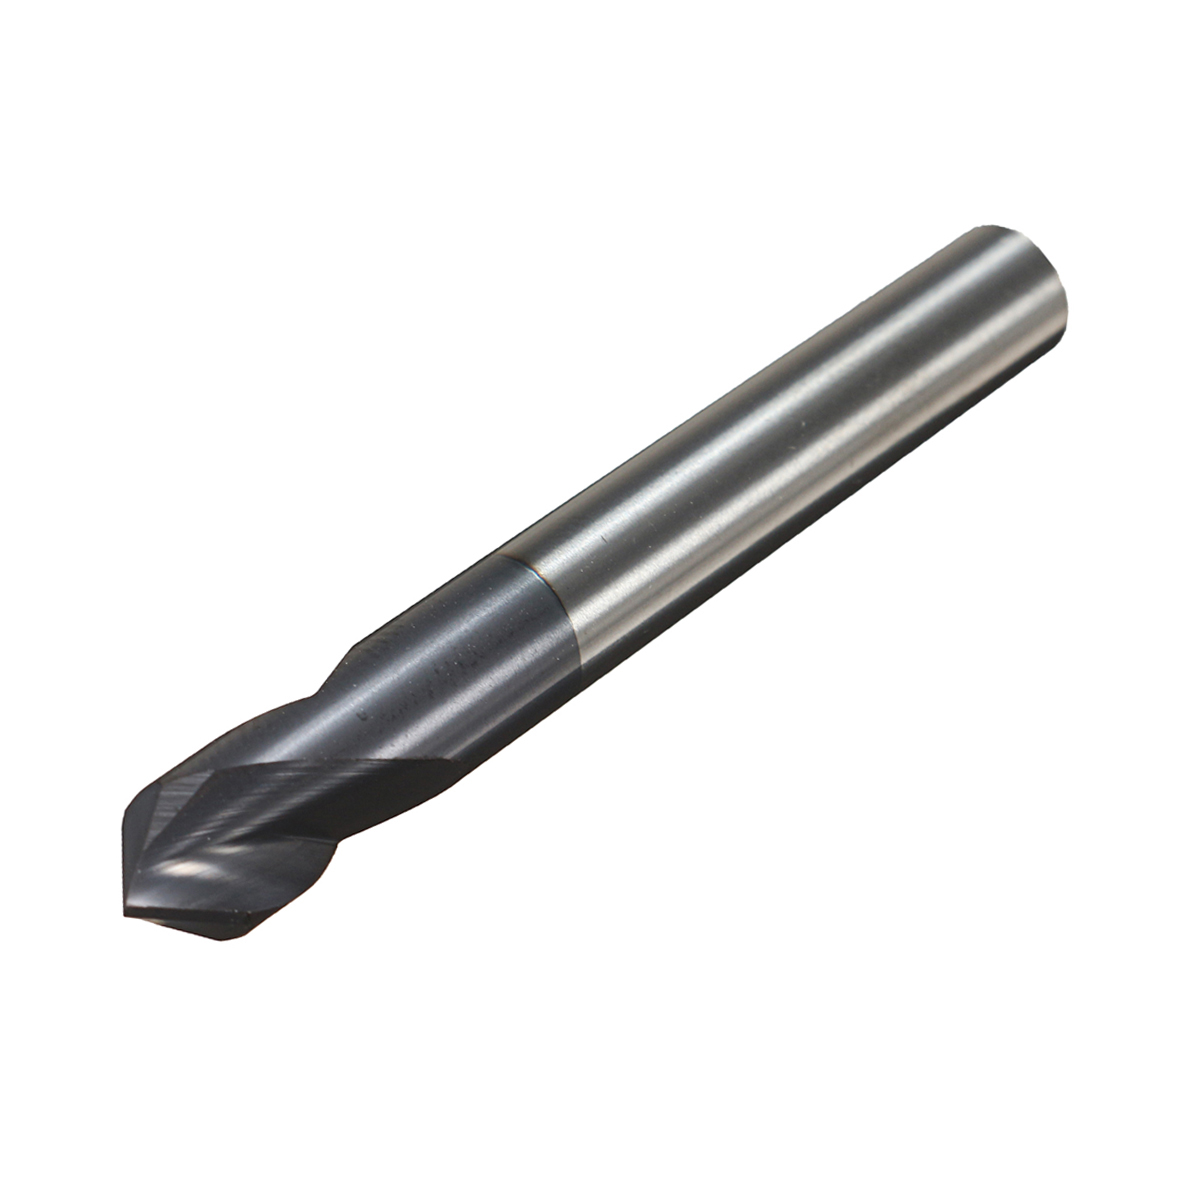 Drillpro-2-Flutes-6mm-Carbide-Chamfer-Mill-90-Degree-HRC45-Milling-Cutter-1108522-2